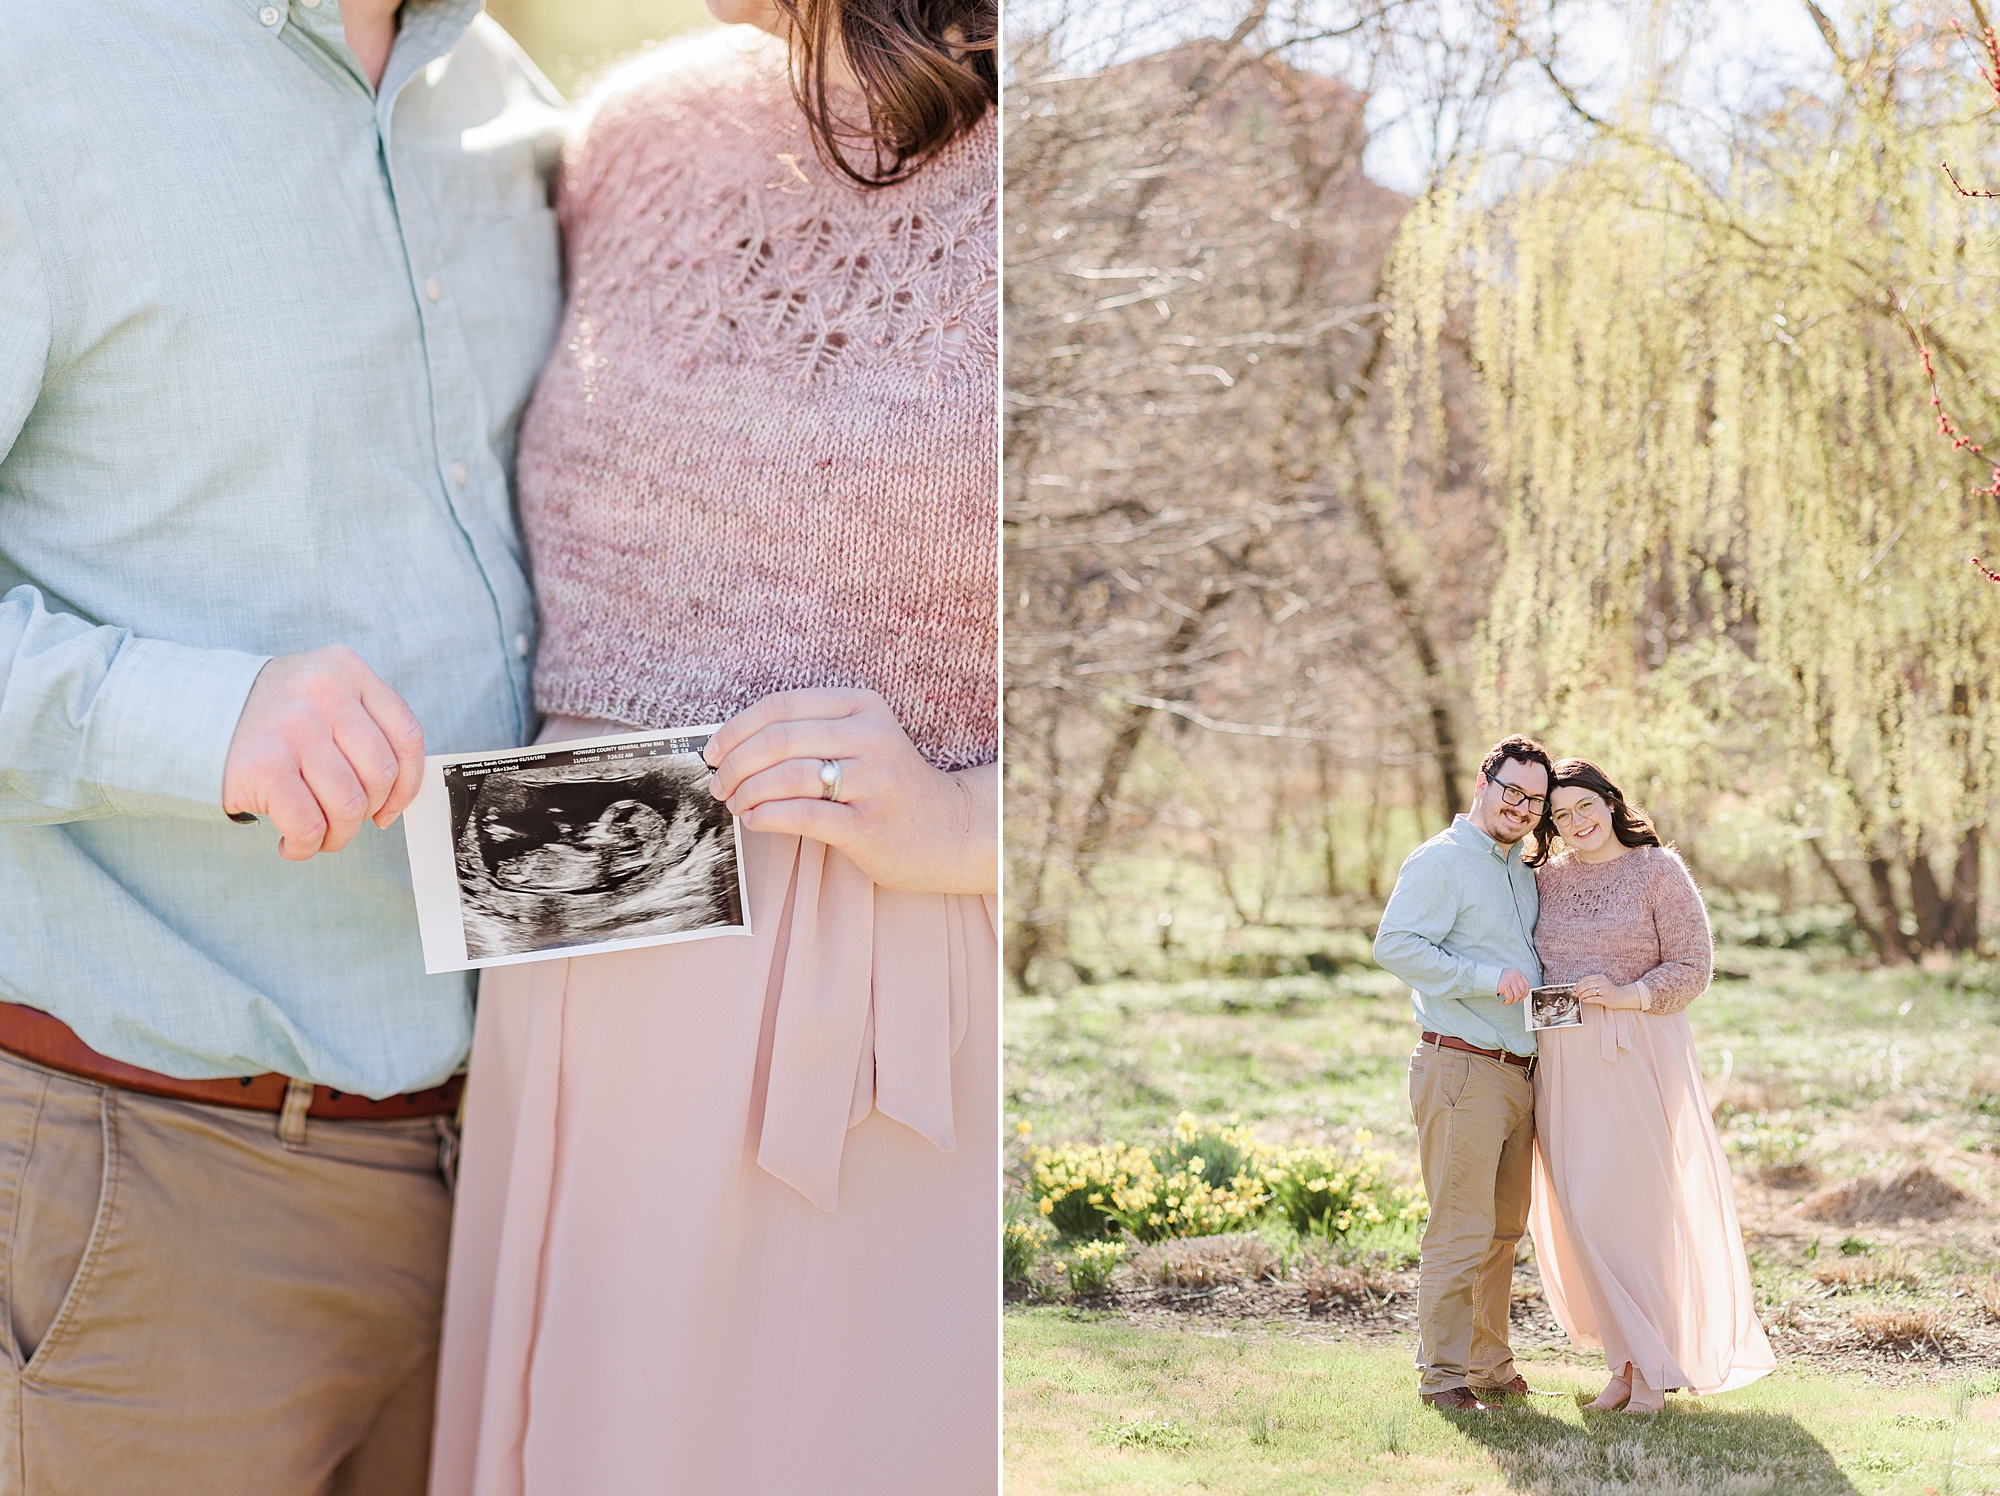 expecting parents hold sonogram in front of pink dress 